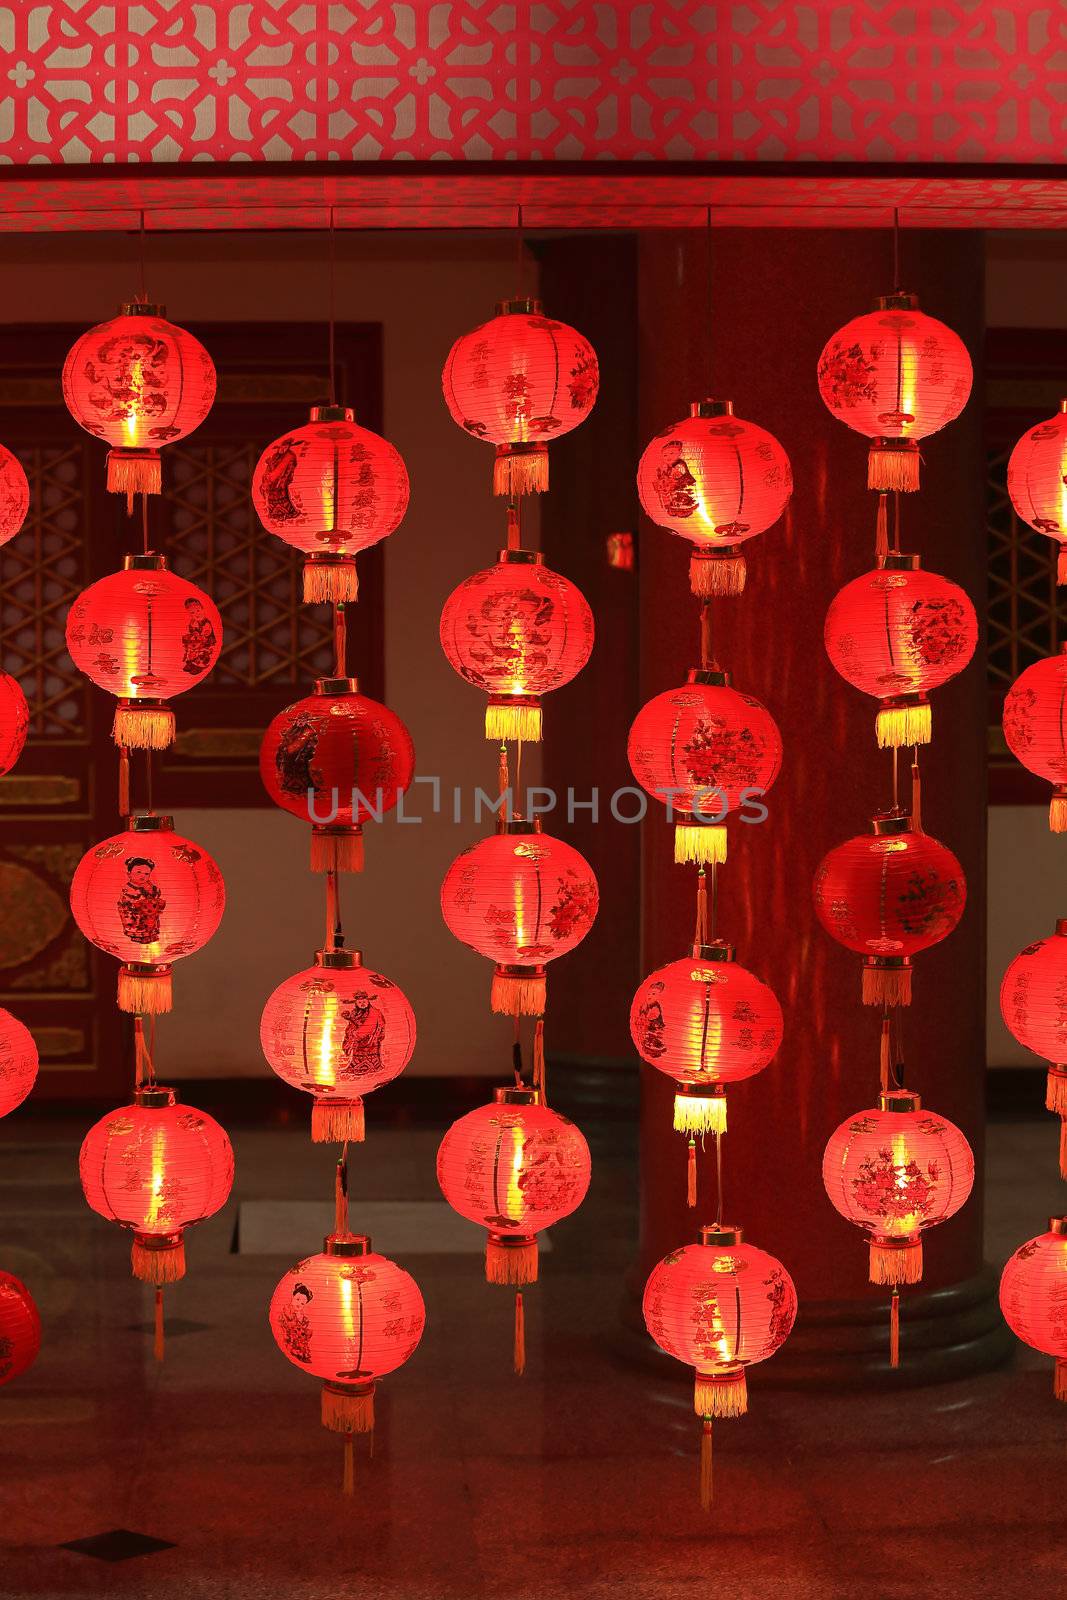 Big red lanterns by rufous